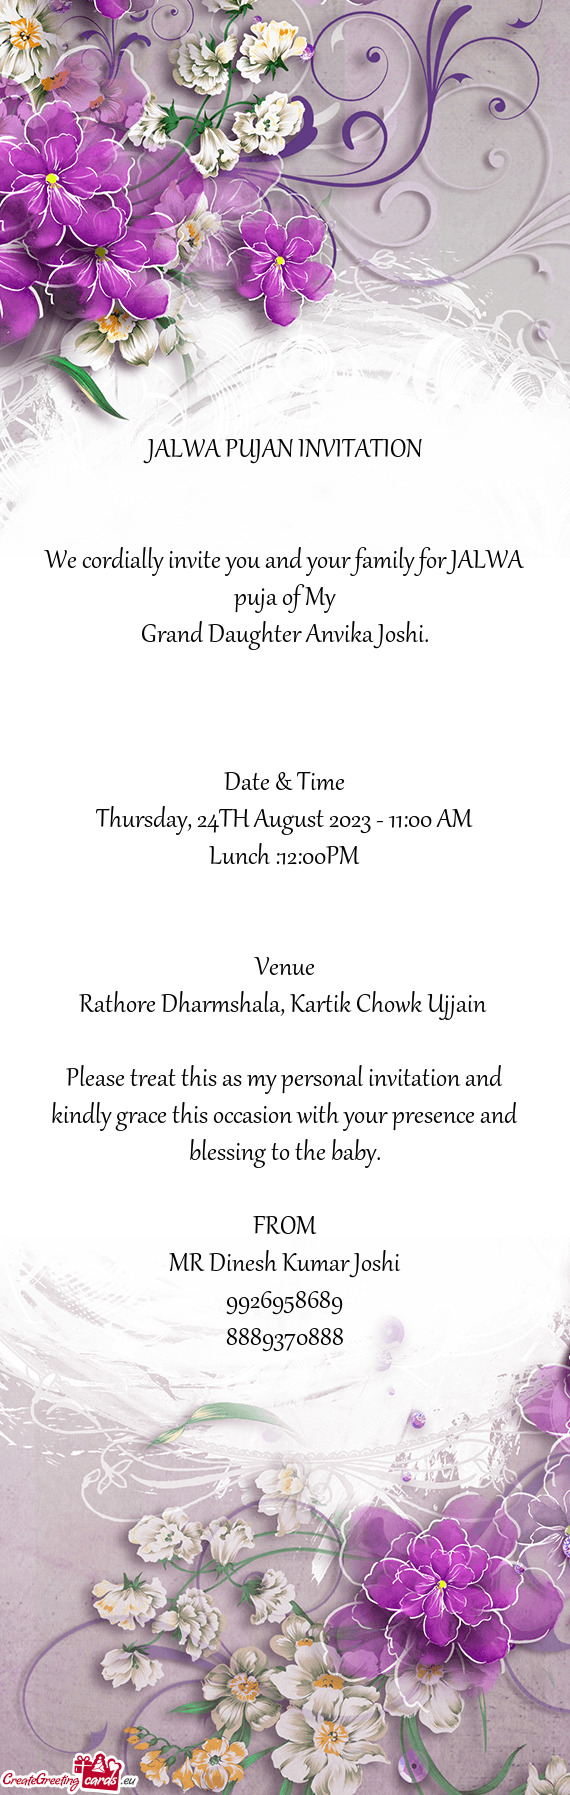 We cordially invite you and your family for JALWA puja of My